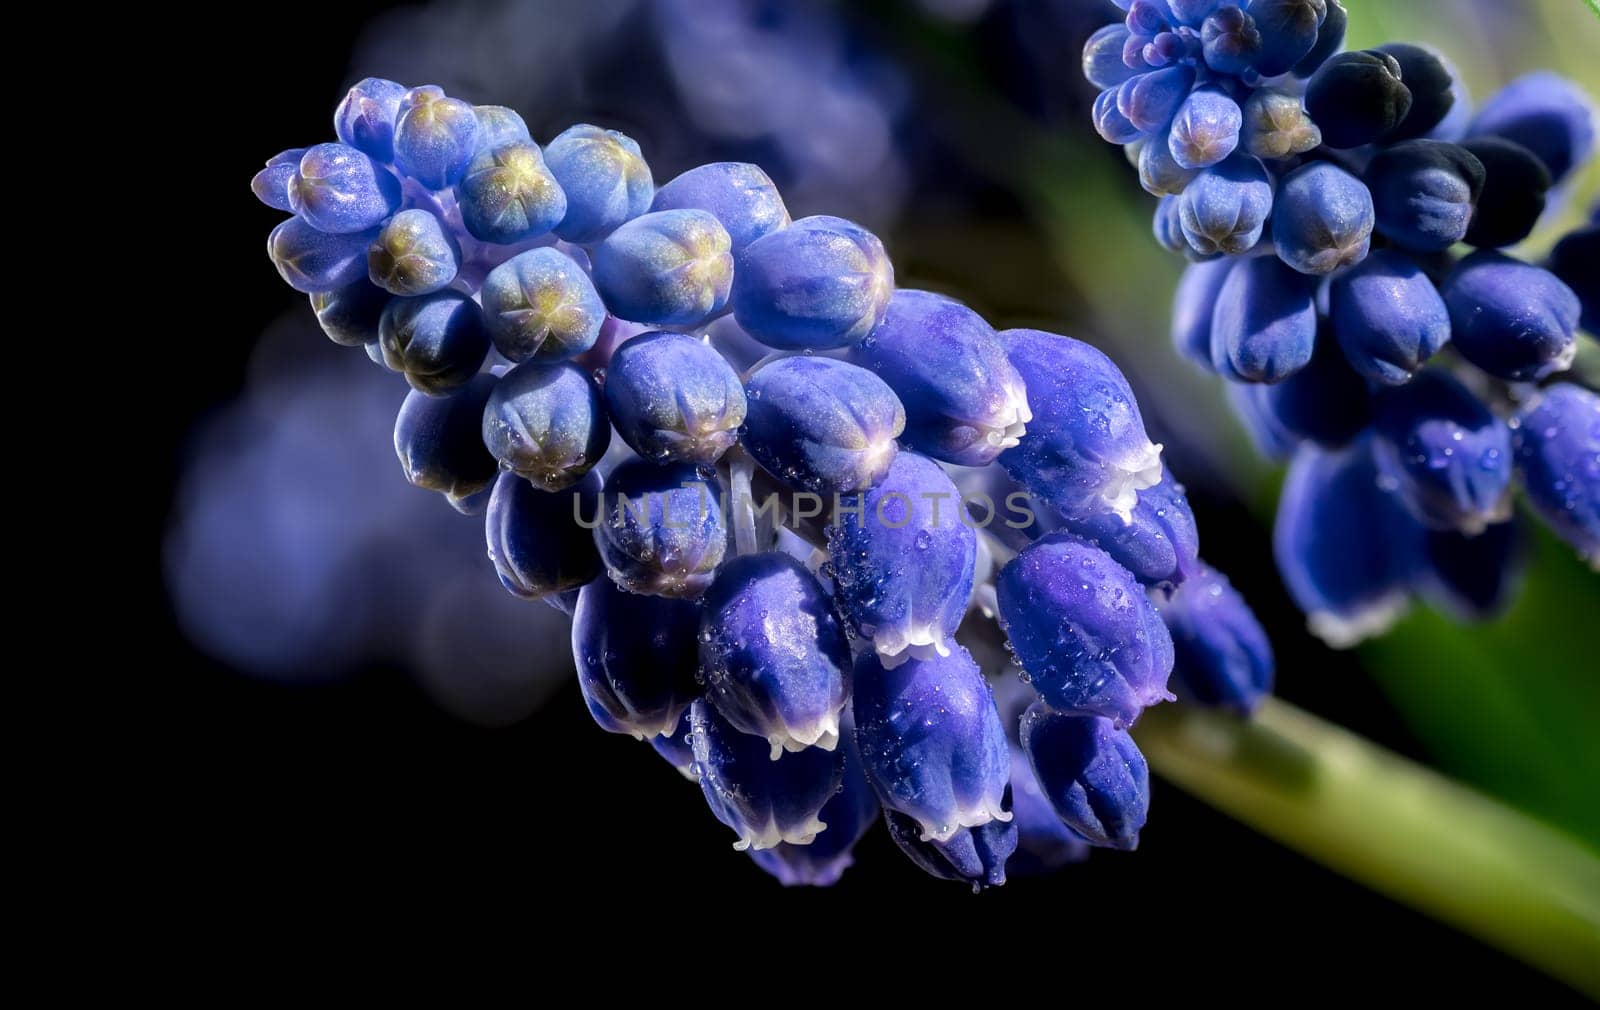 Beautiful blooming grape hyacinth Muscari Alida flower isolated on a black background. Flower head close-up.